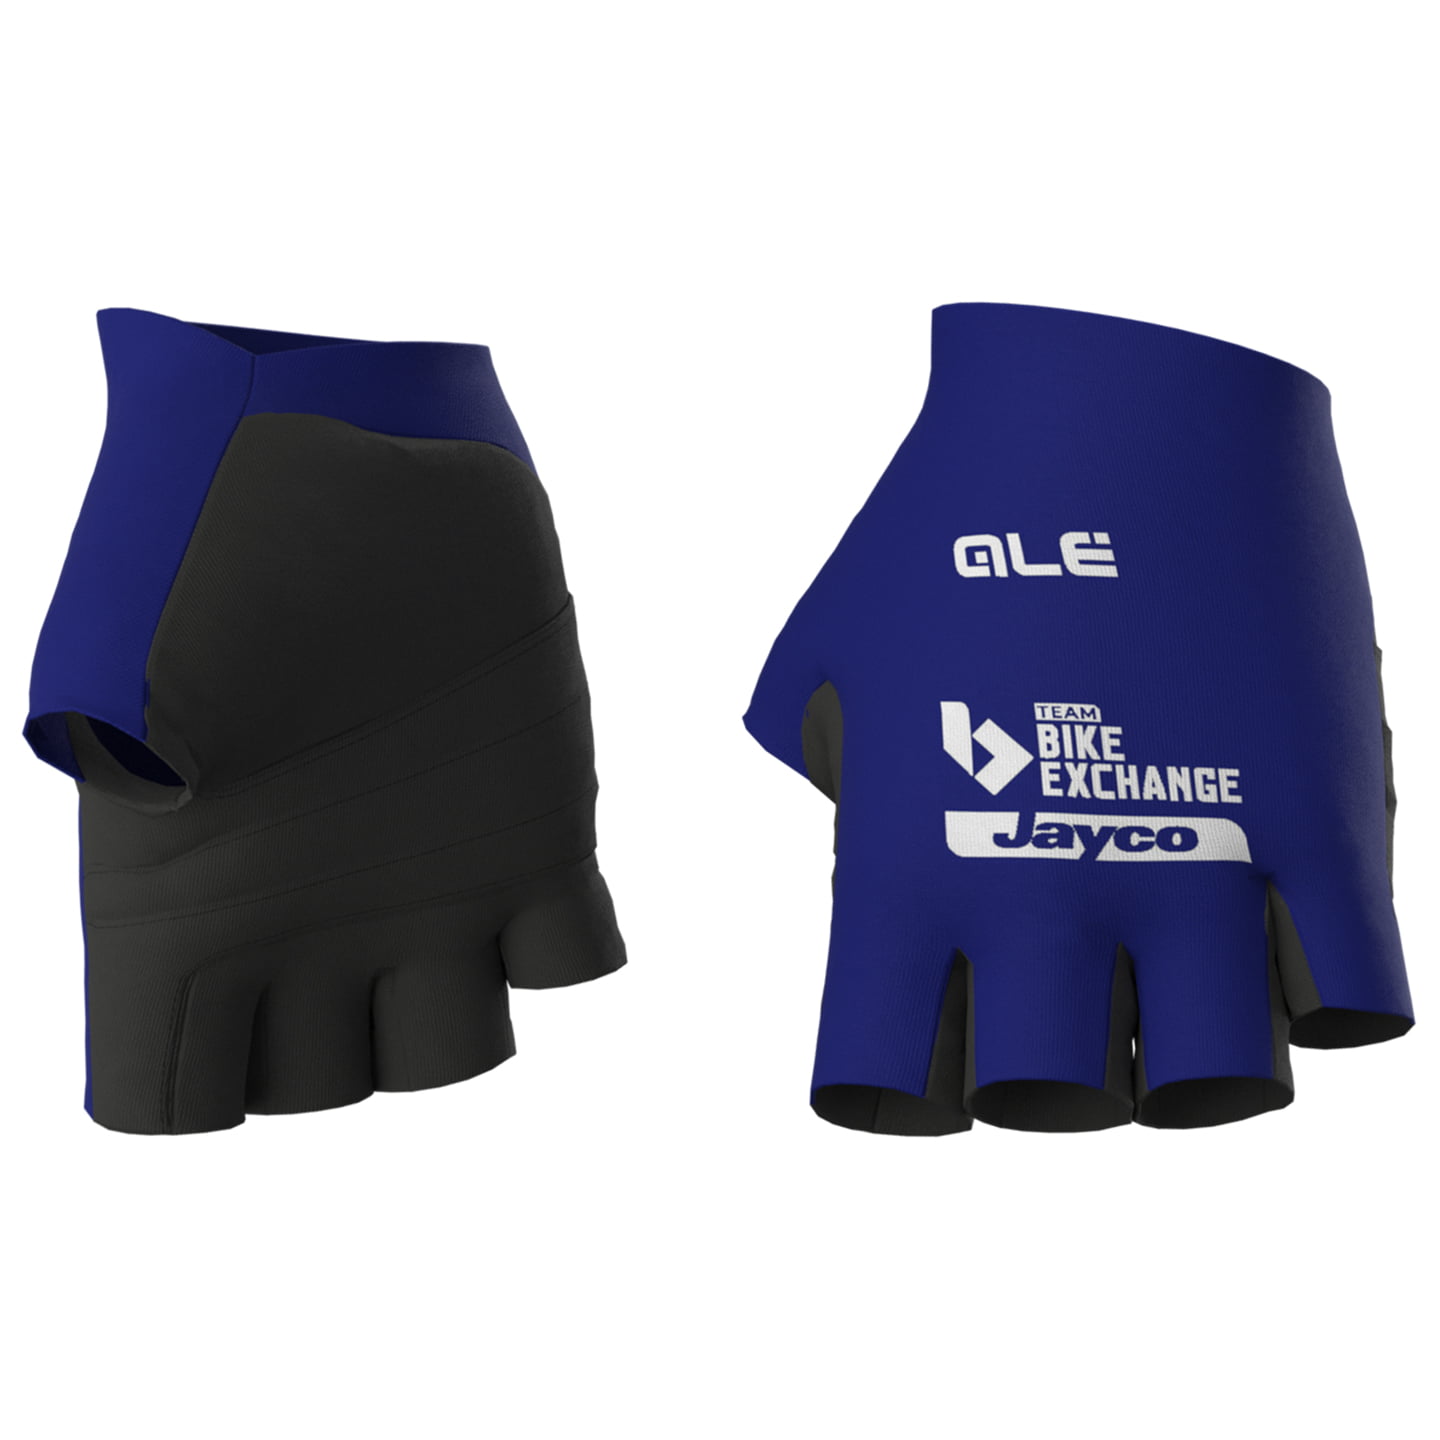 TEAM BIKEEXCHANGE-JAYCO 2022 Cycling Gloves, for men, size XL, Cycling gloves, Cycle gear